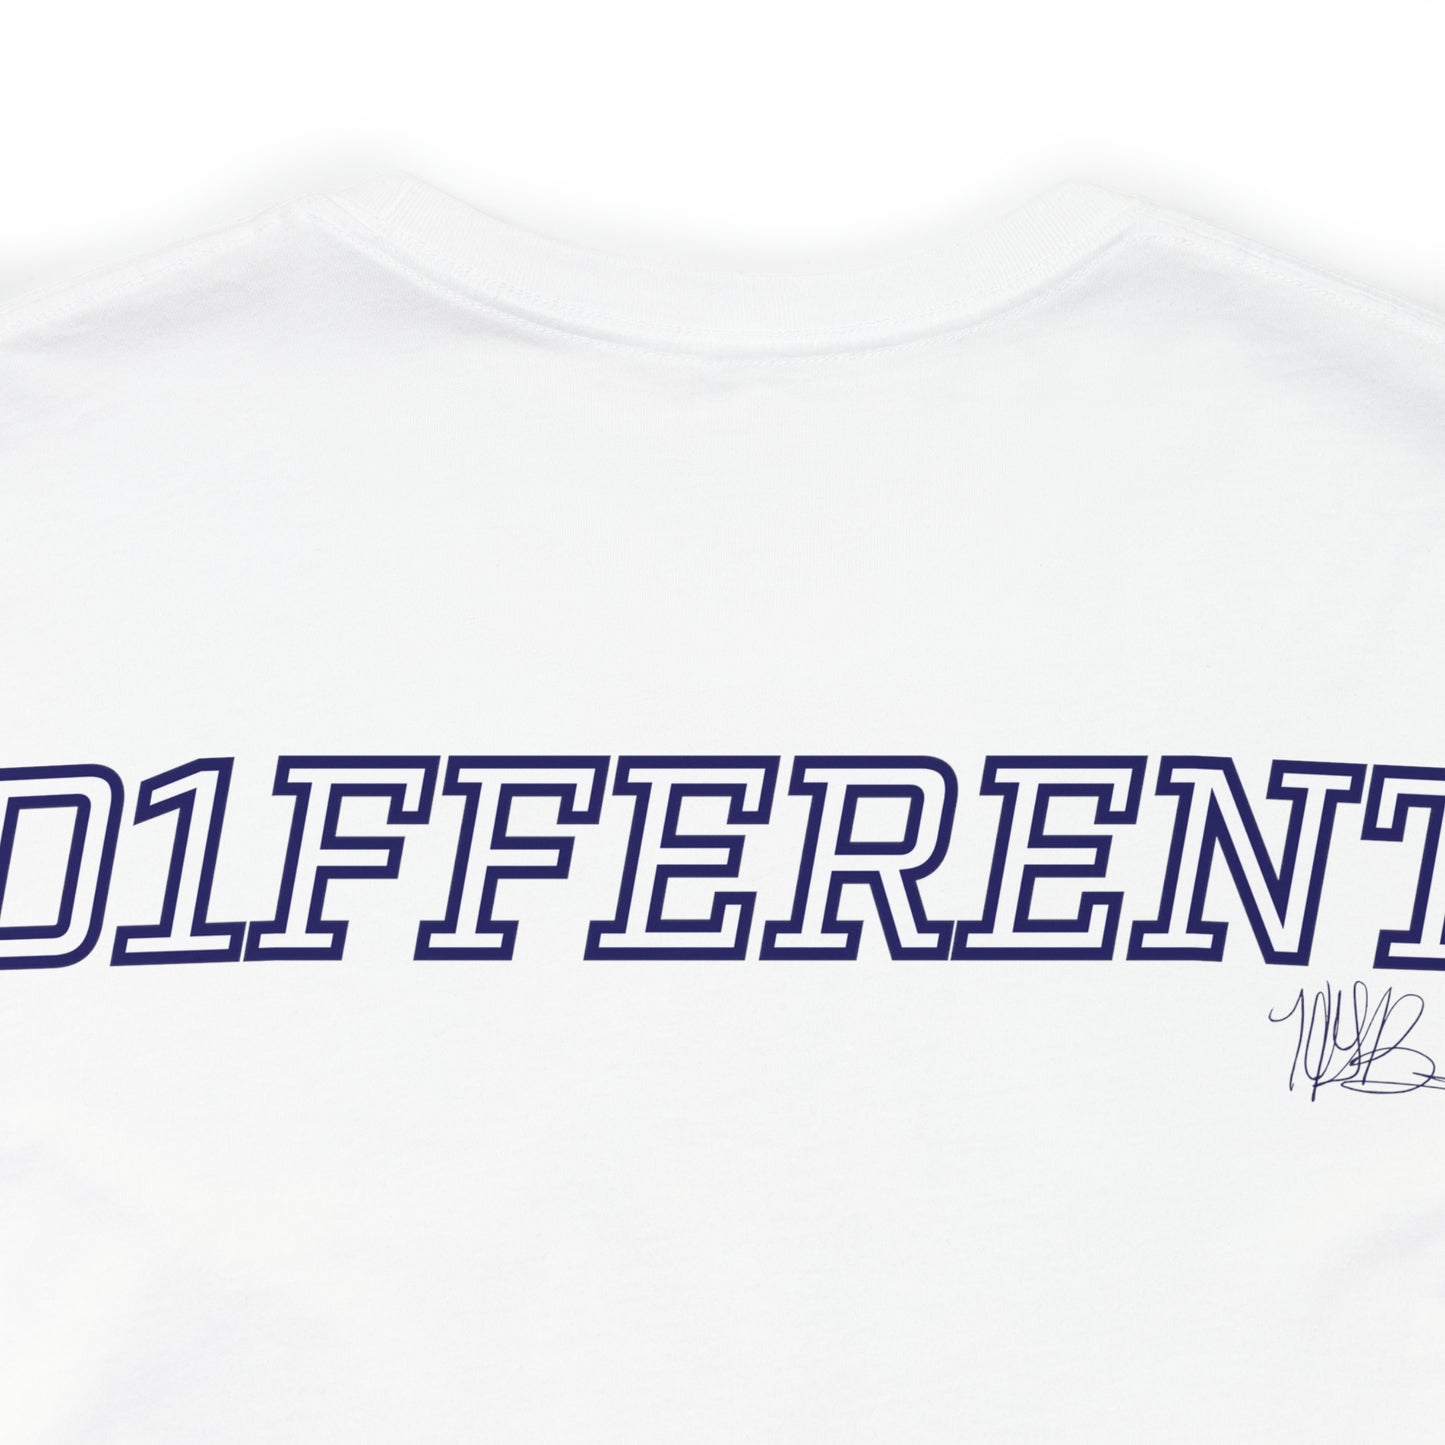 Hope Briggs: Different Tee